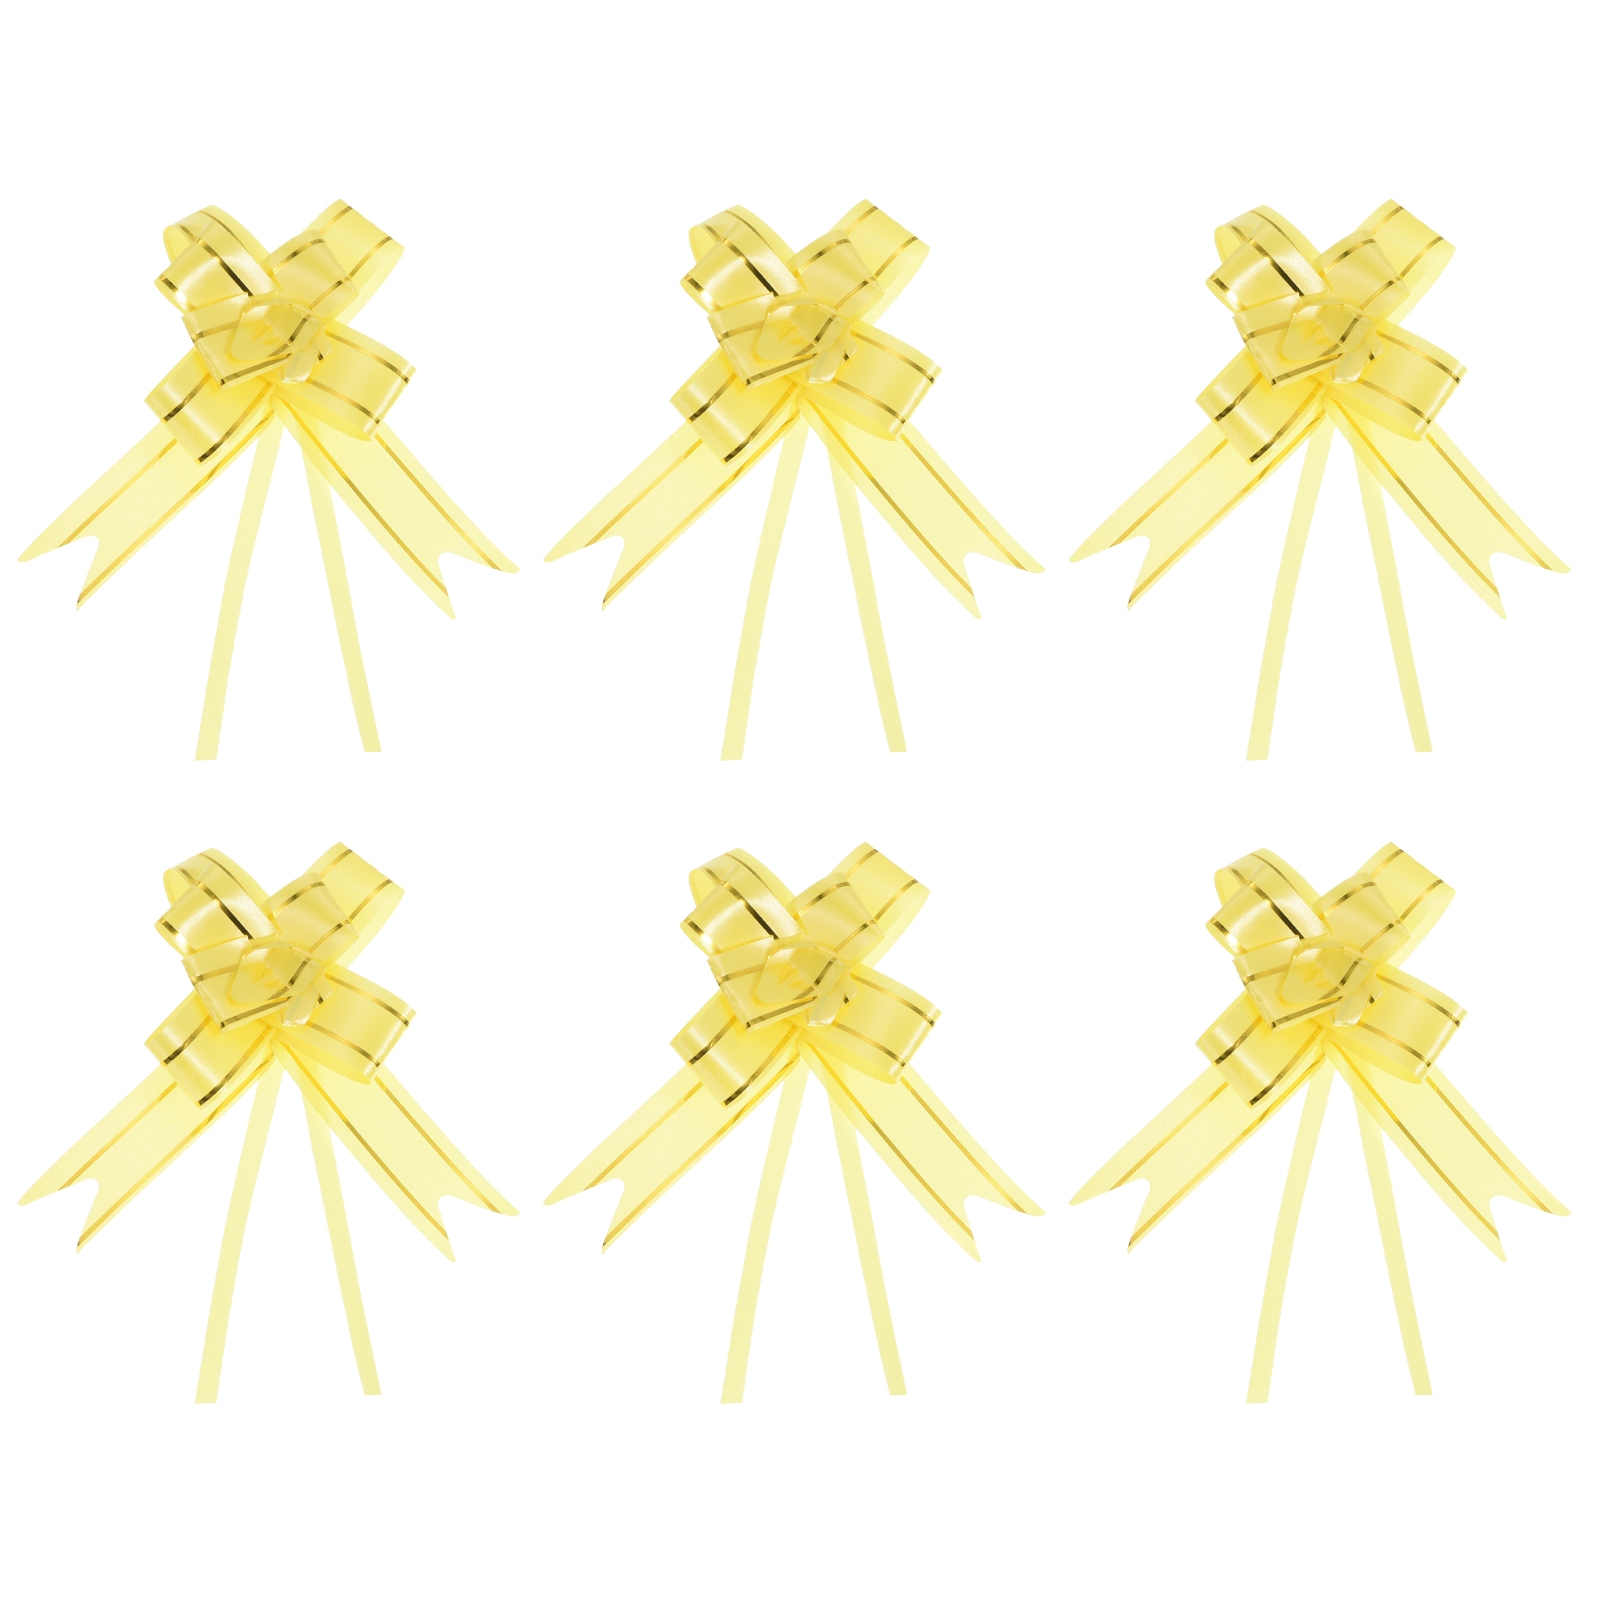 Uxcell 10 Inch Pull Bows Ribbon Gift Wrapping String Gold Thread